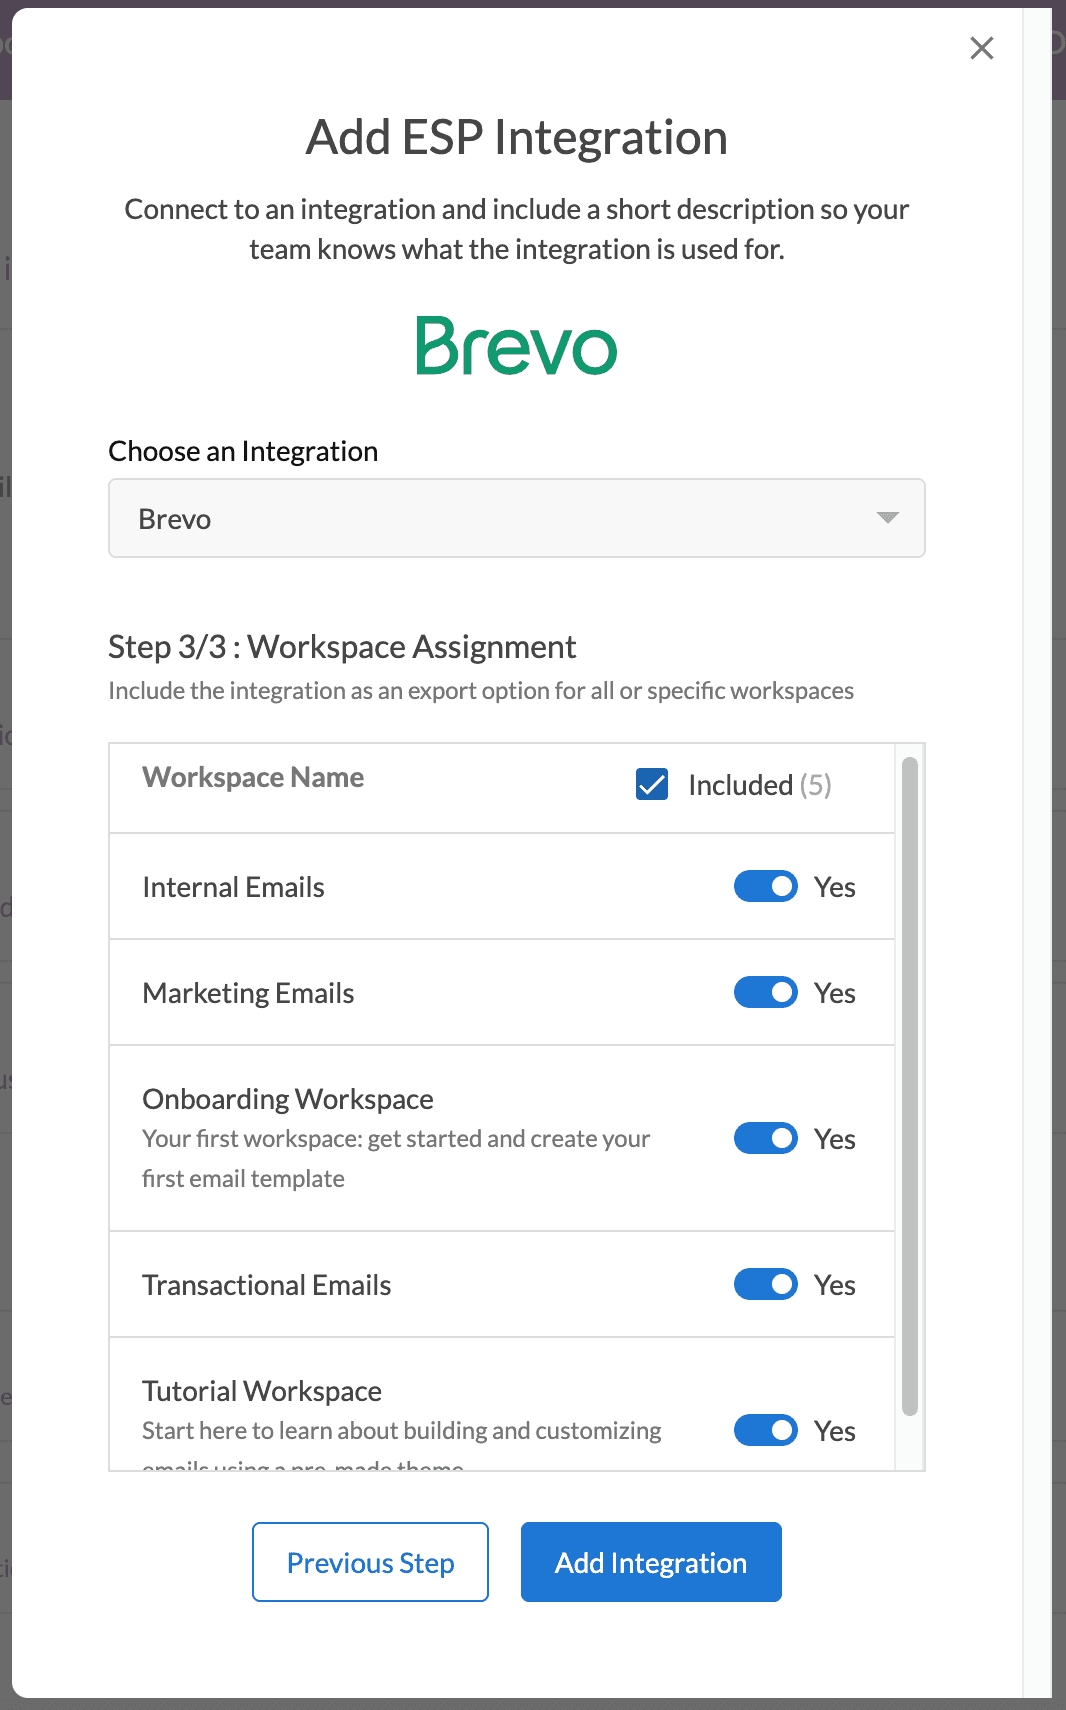 Dyspatch add Brevo integration modal 2 of 3 with sender workspace selections